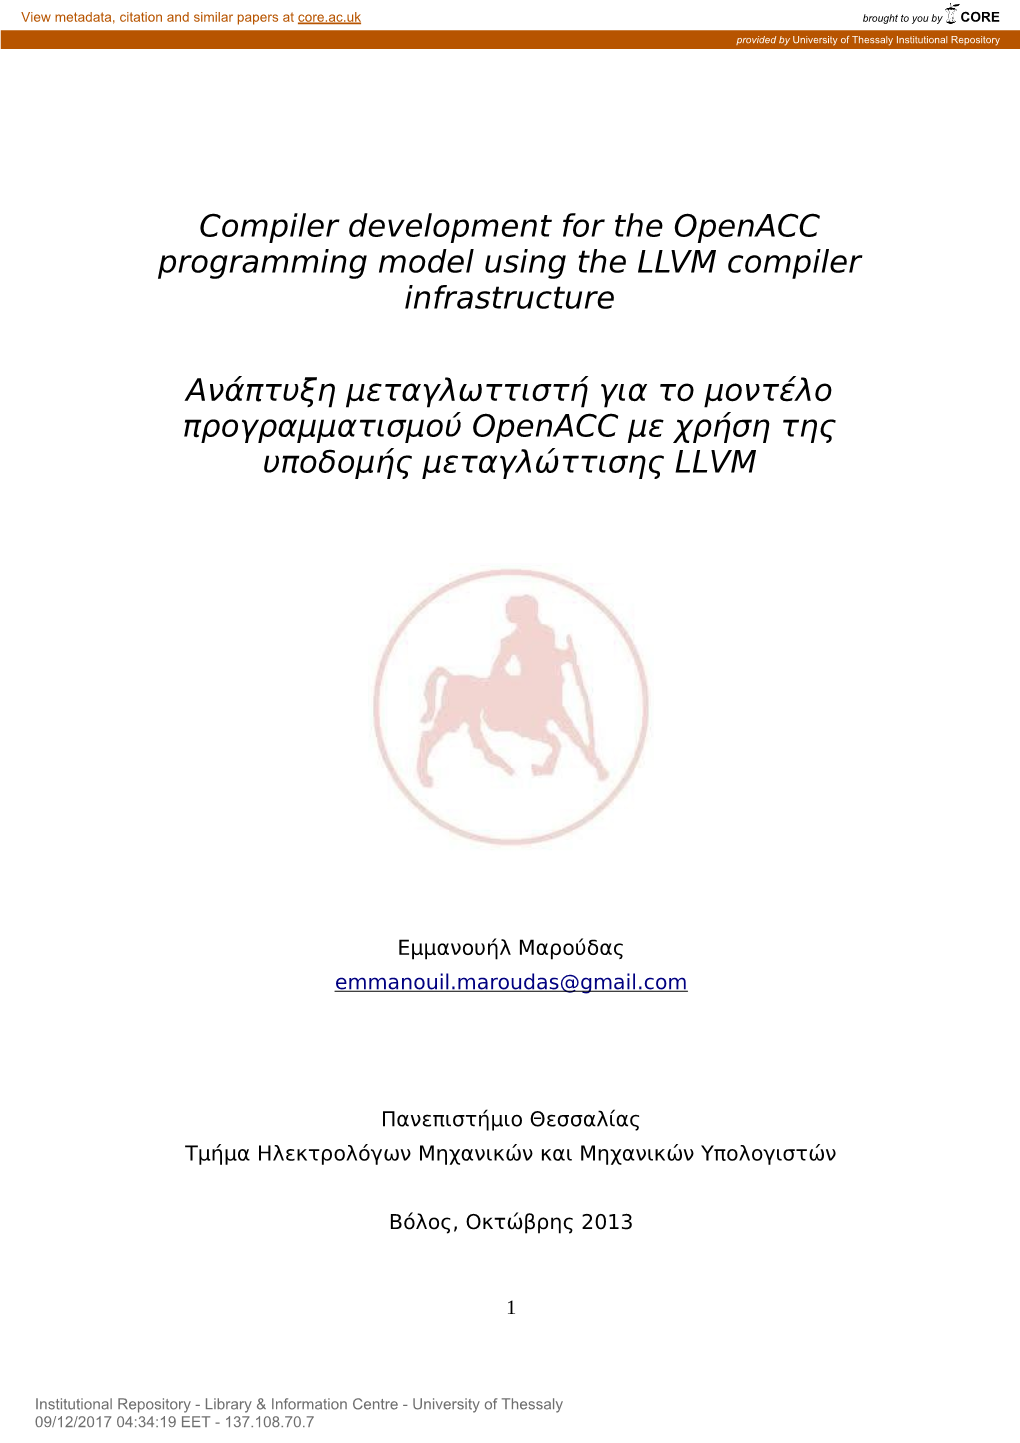 Compiler Development for the Openacc Programming Model Using the LLVM Compiler Infrastructure